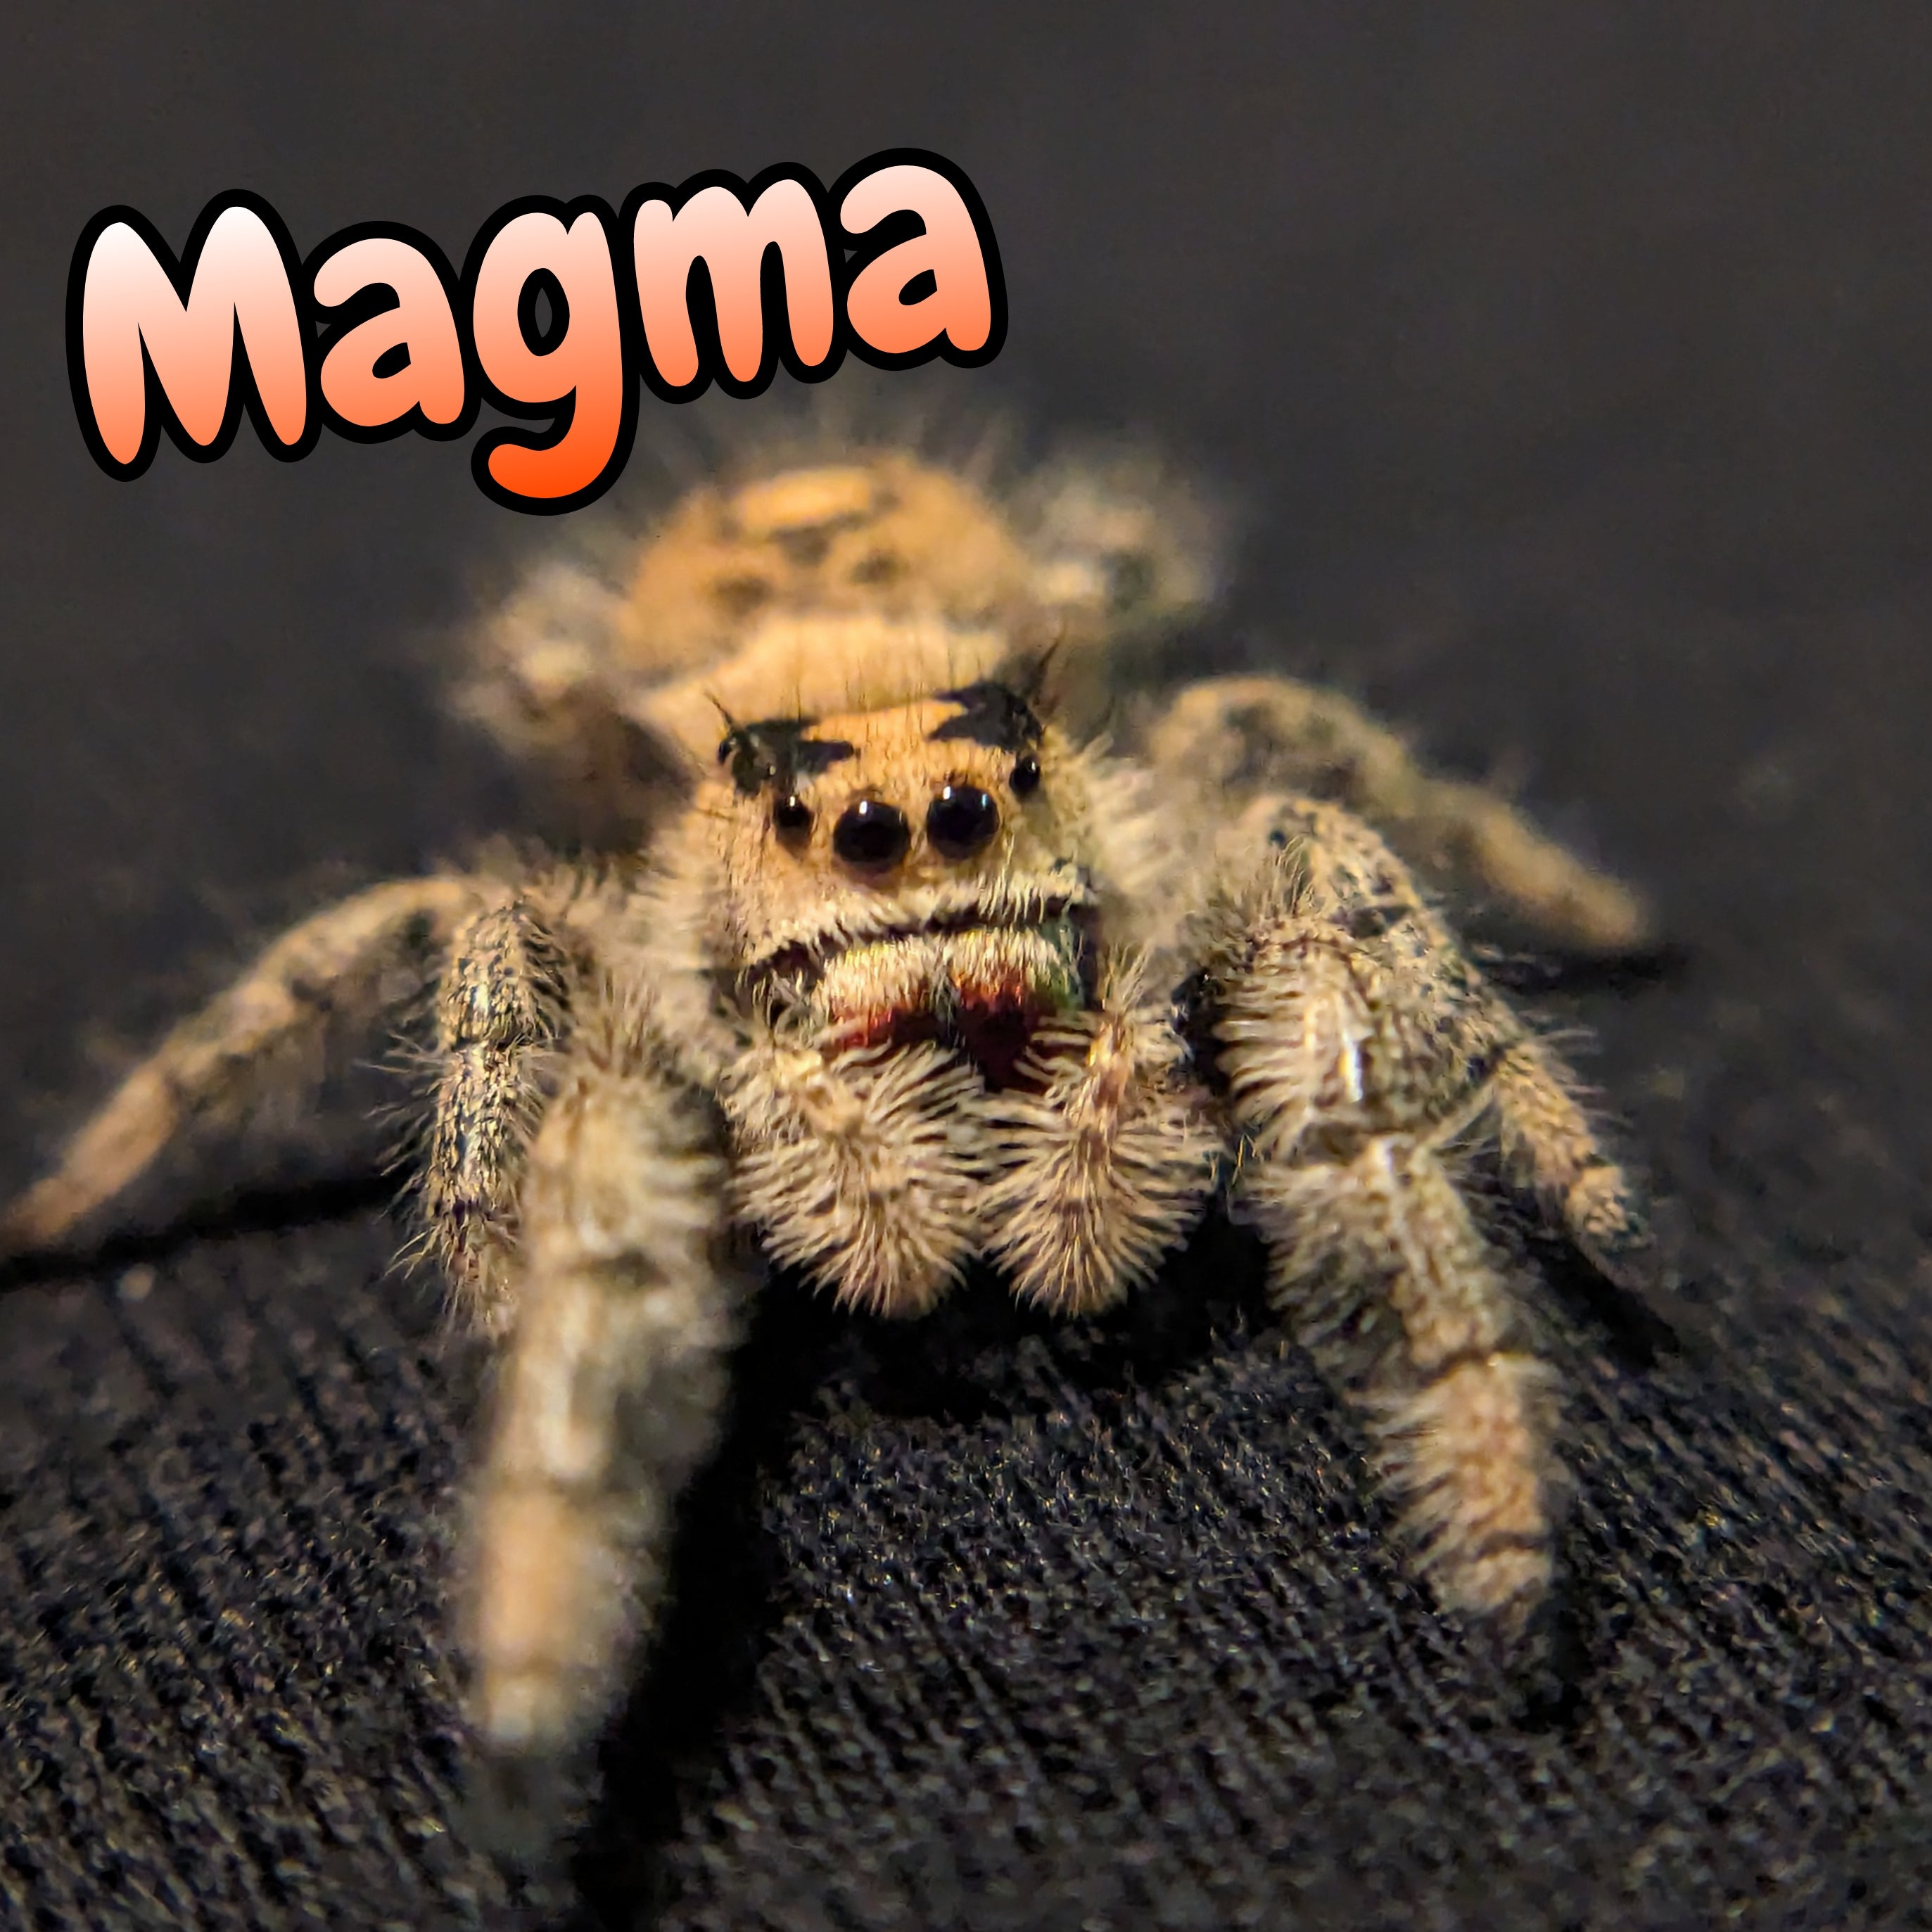 Regal Jumping Spider “Magma”